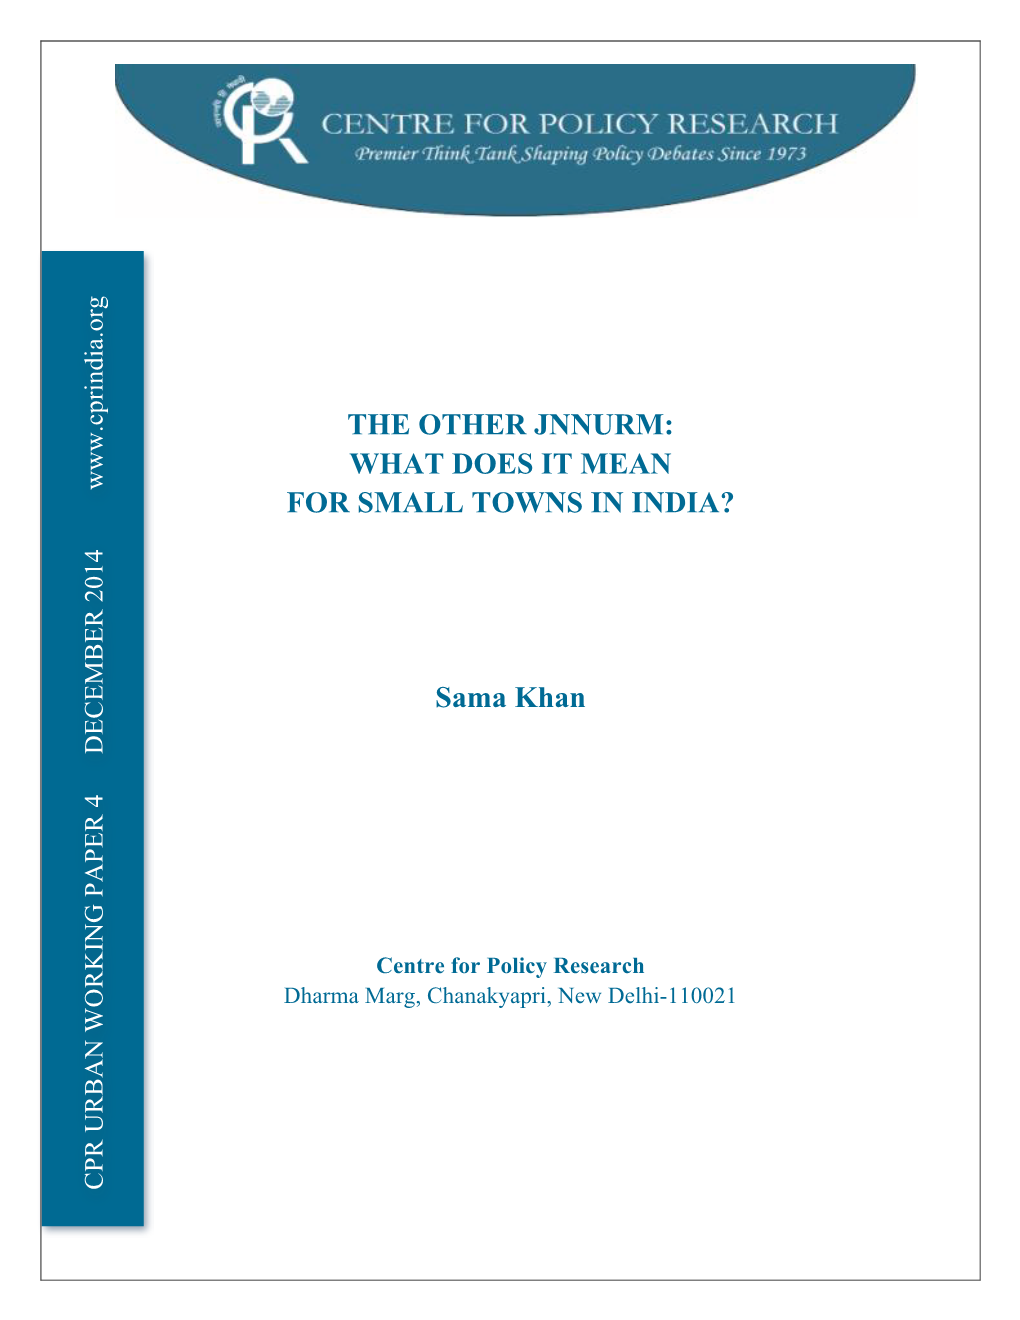 The Other Jnnurm: What Does It Mean for Small Towns In